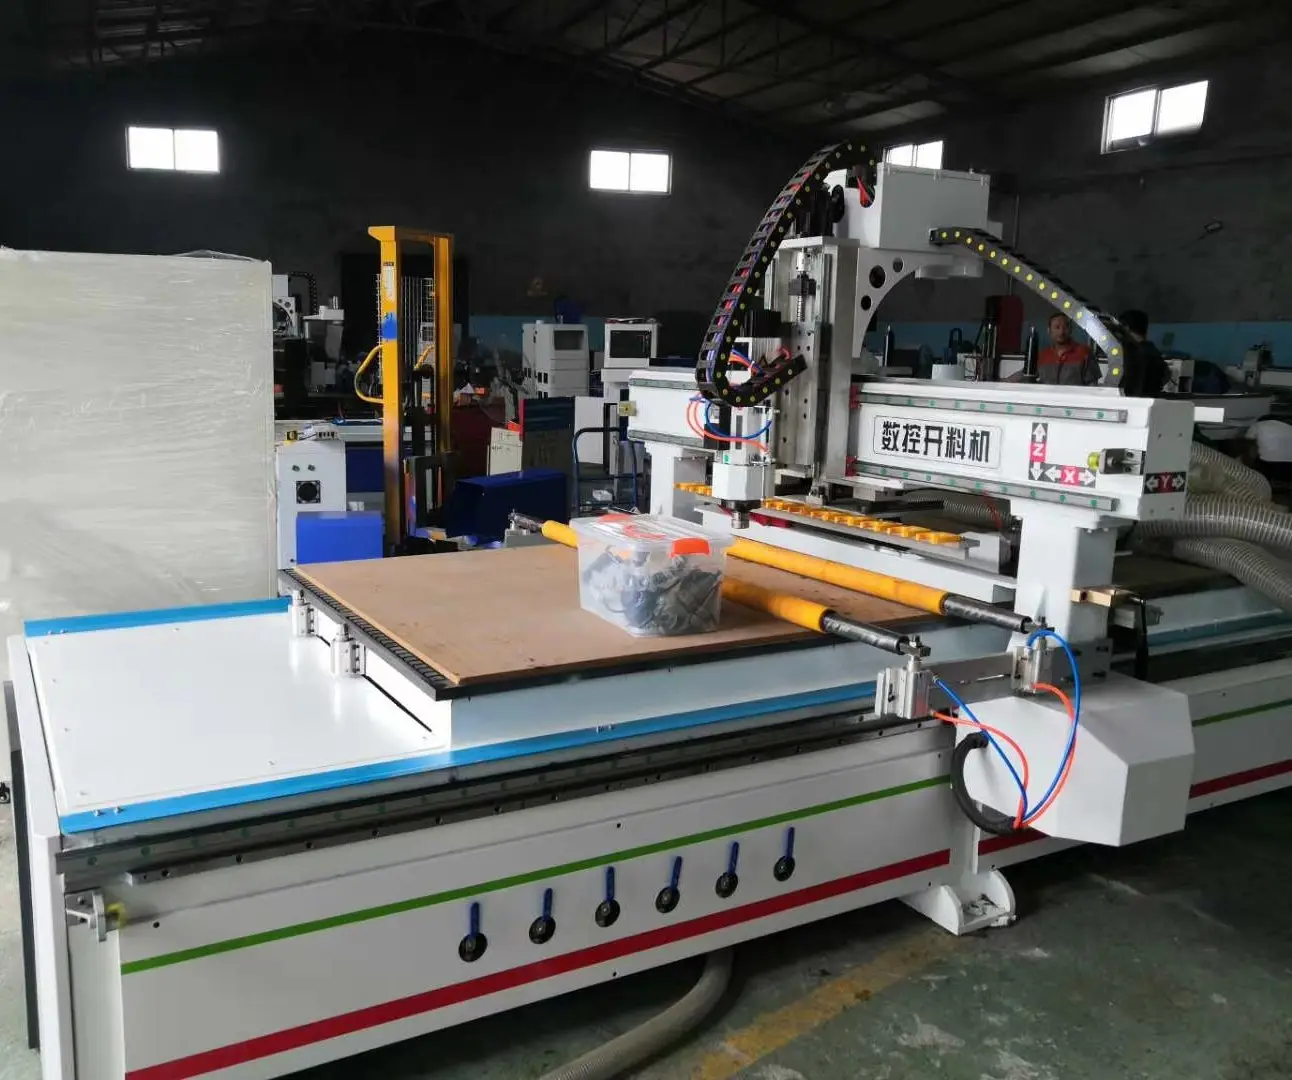 Auto tool changer ATC CNC Router for MDF wood PVC acrylic aluminum alucobond stone marble granite Foam KT board plastic